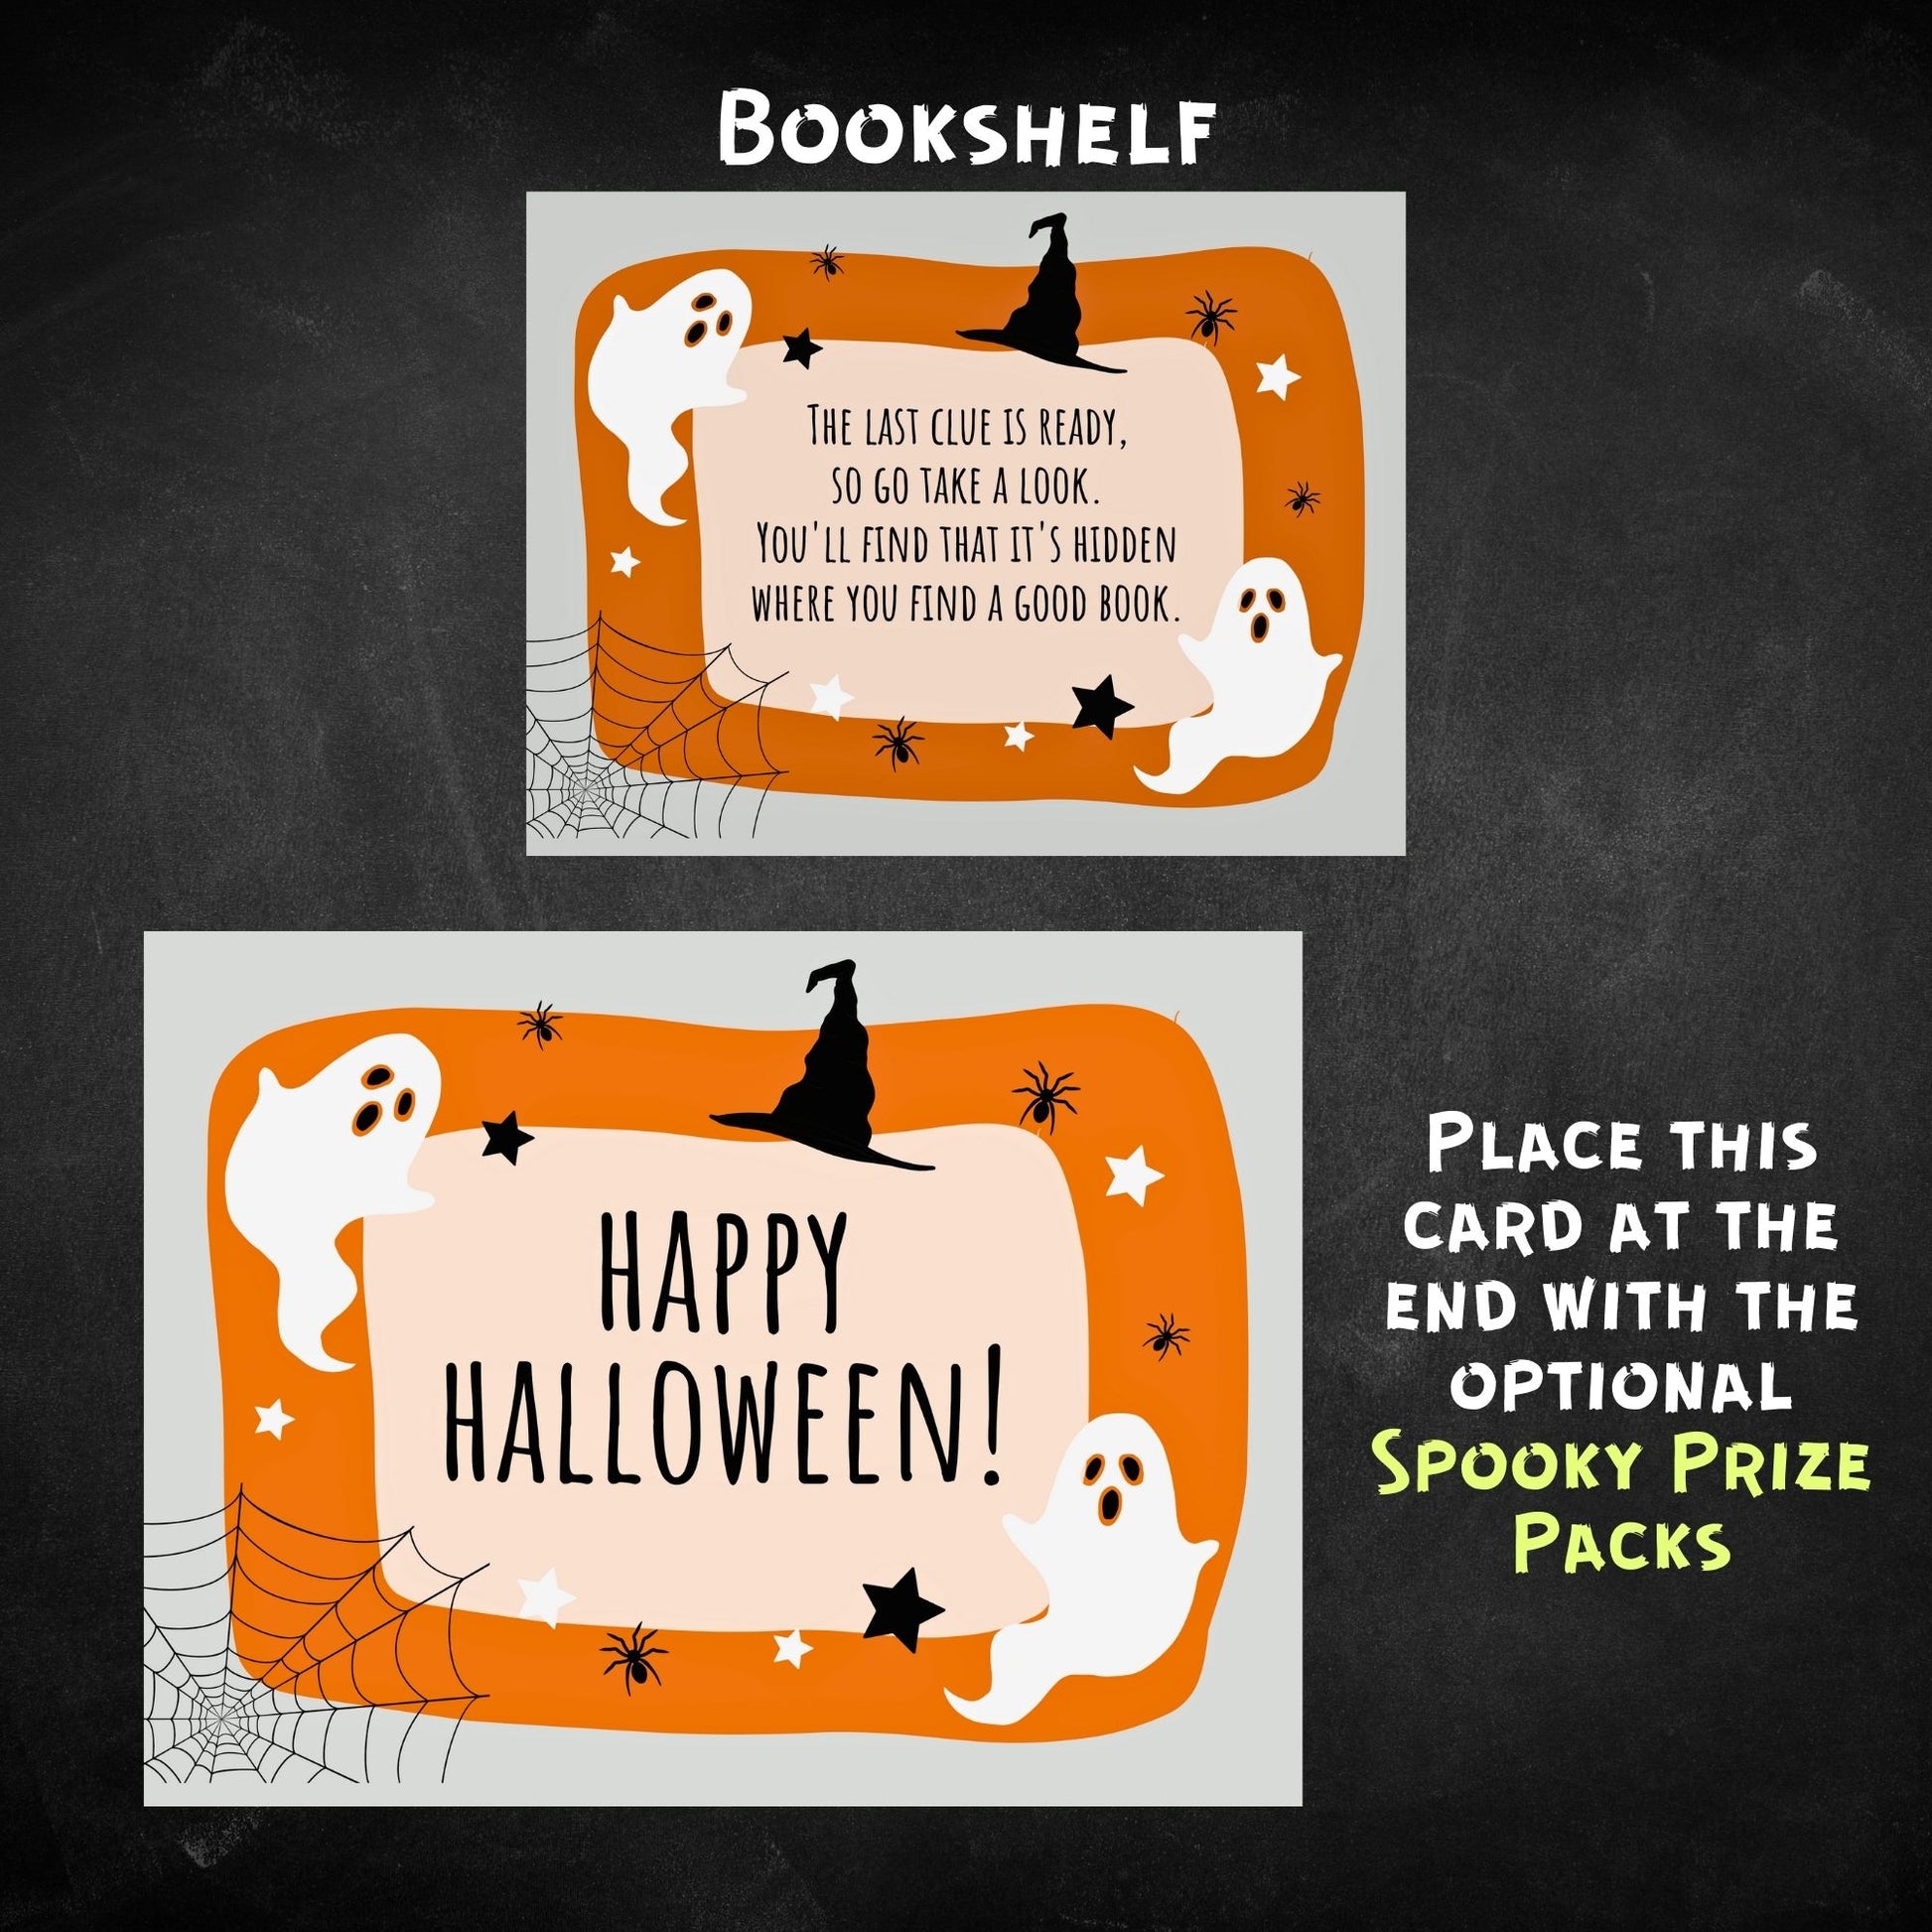 The last clue card is displayed, leading to a bookshelf. A final card with the message "Happy Halloween" sits next to a reminder to place the card at the end of the hunt along with the optional spooky prize packs.